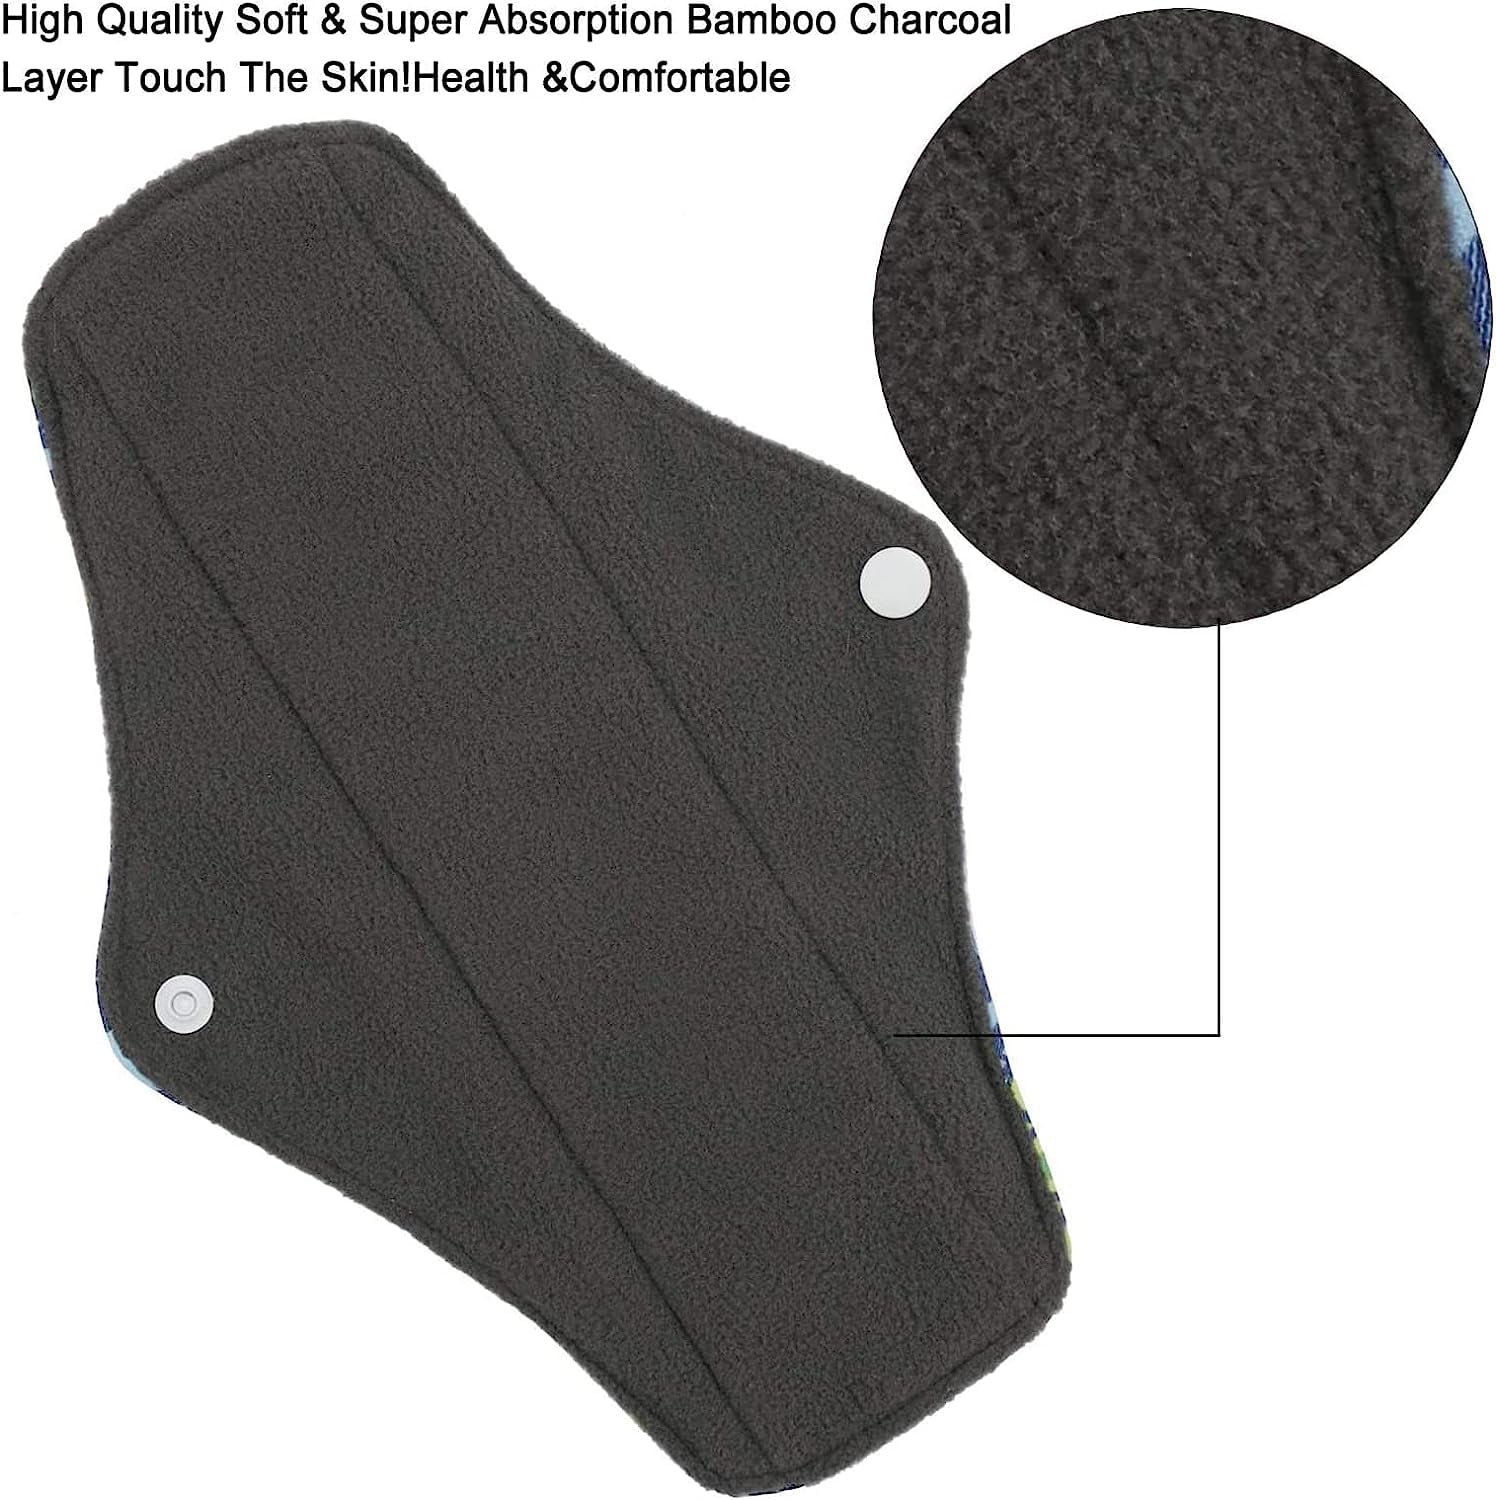 Women's Reusable Menstrual Pads, Bamboo Charcoal Incontinence Pads